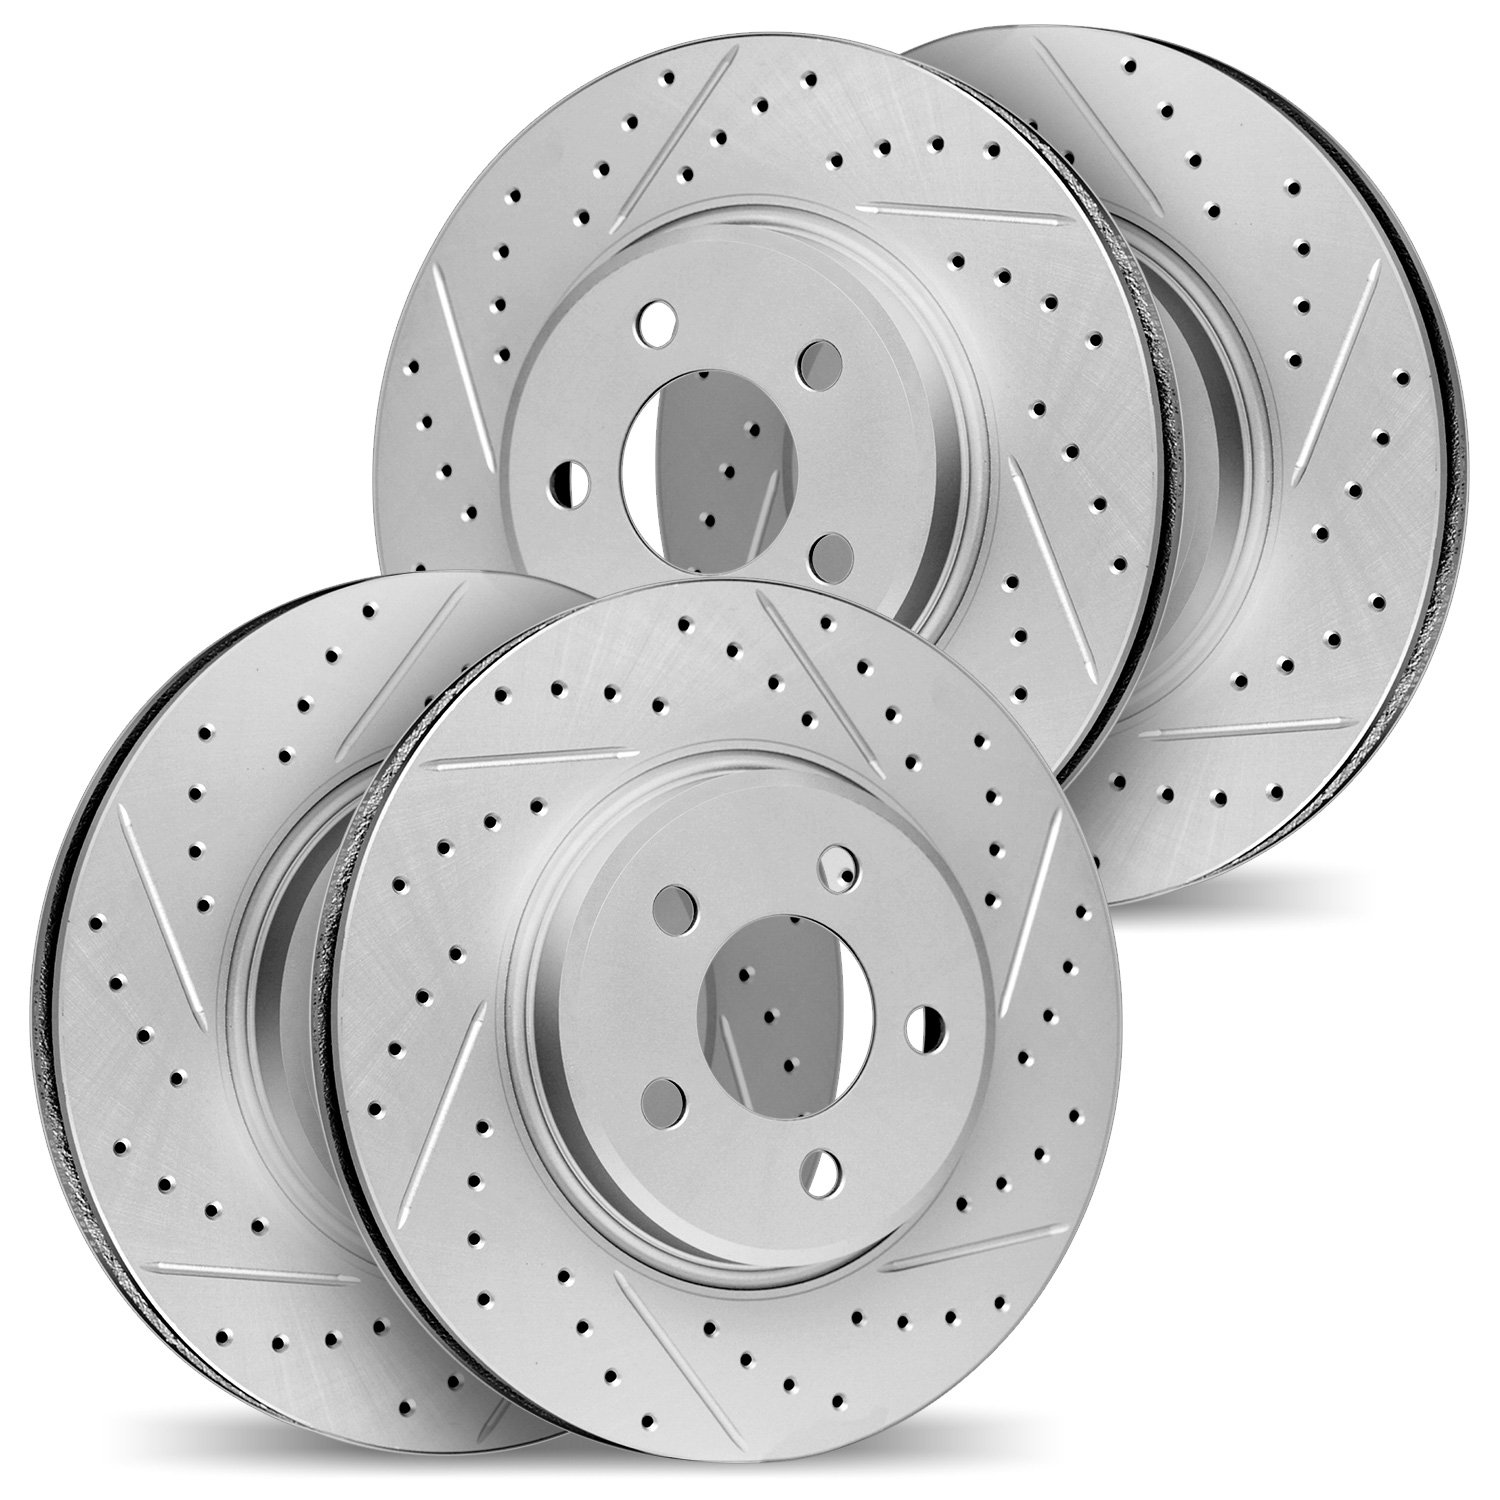 2004-75024 Geoperformance Drilled/Slotted Brake Rotors, Fits Select Lexus/Toyota/Scion, Position: Front and Rear